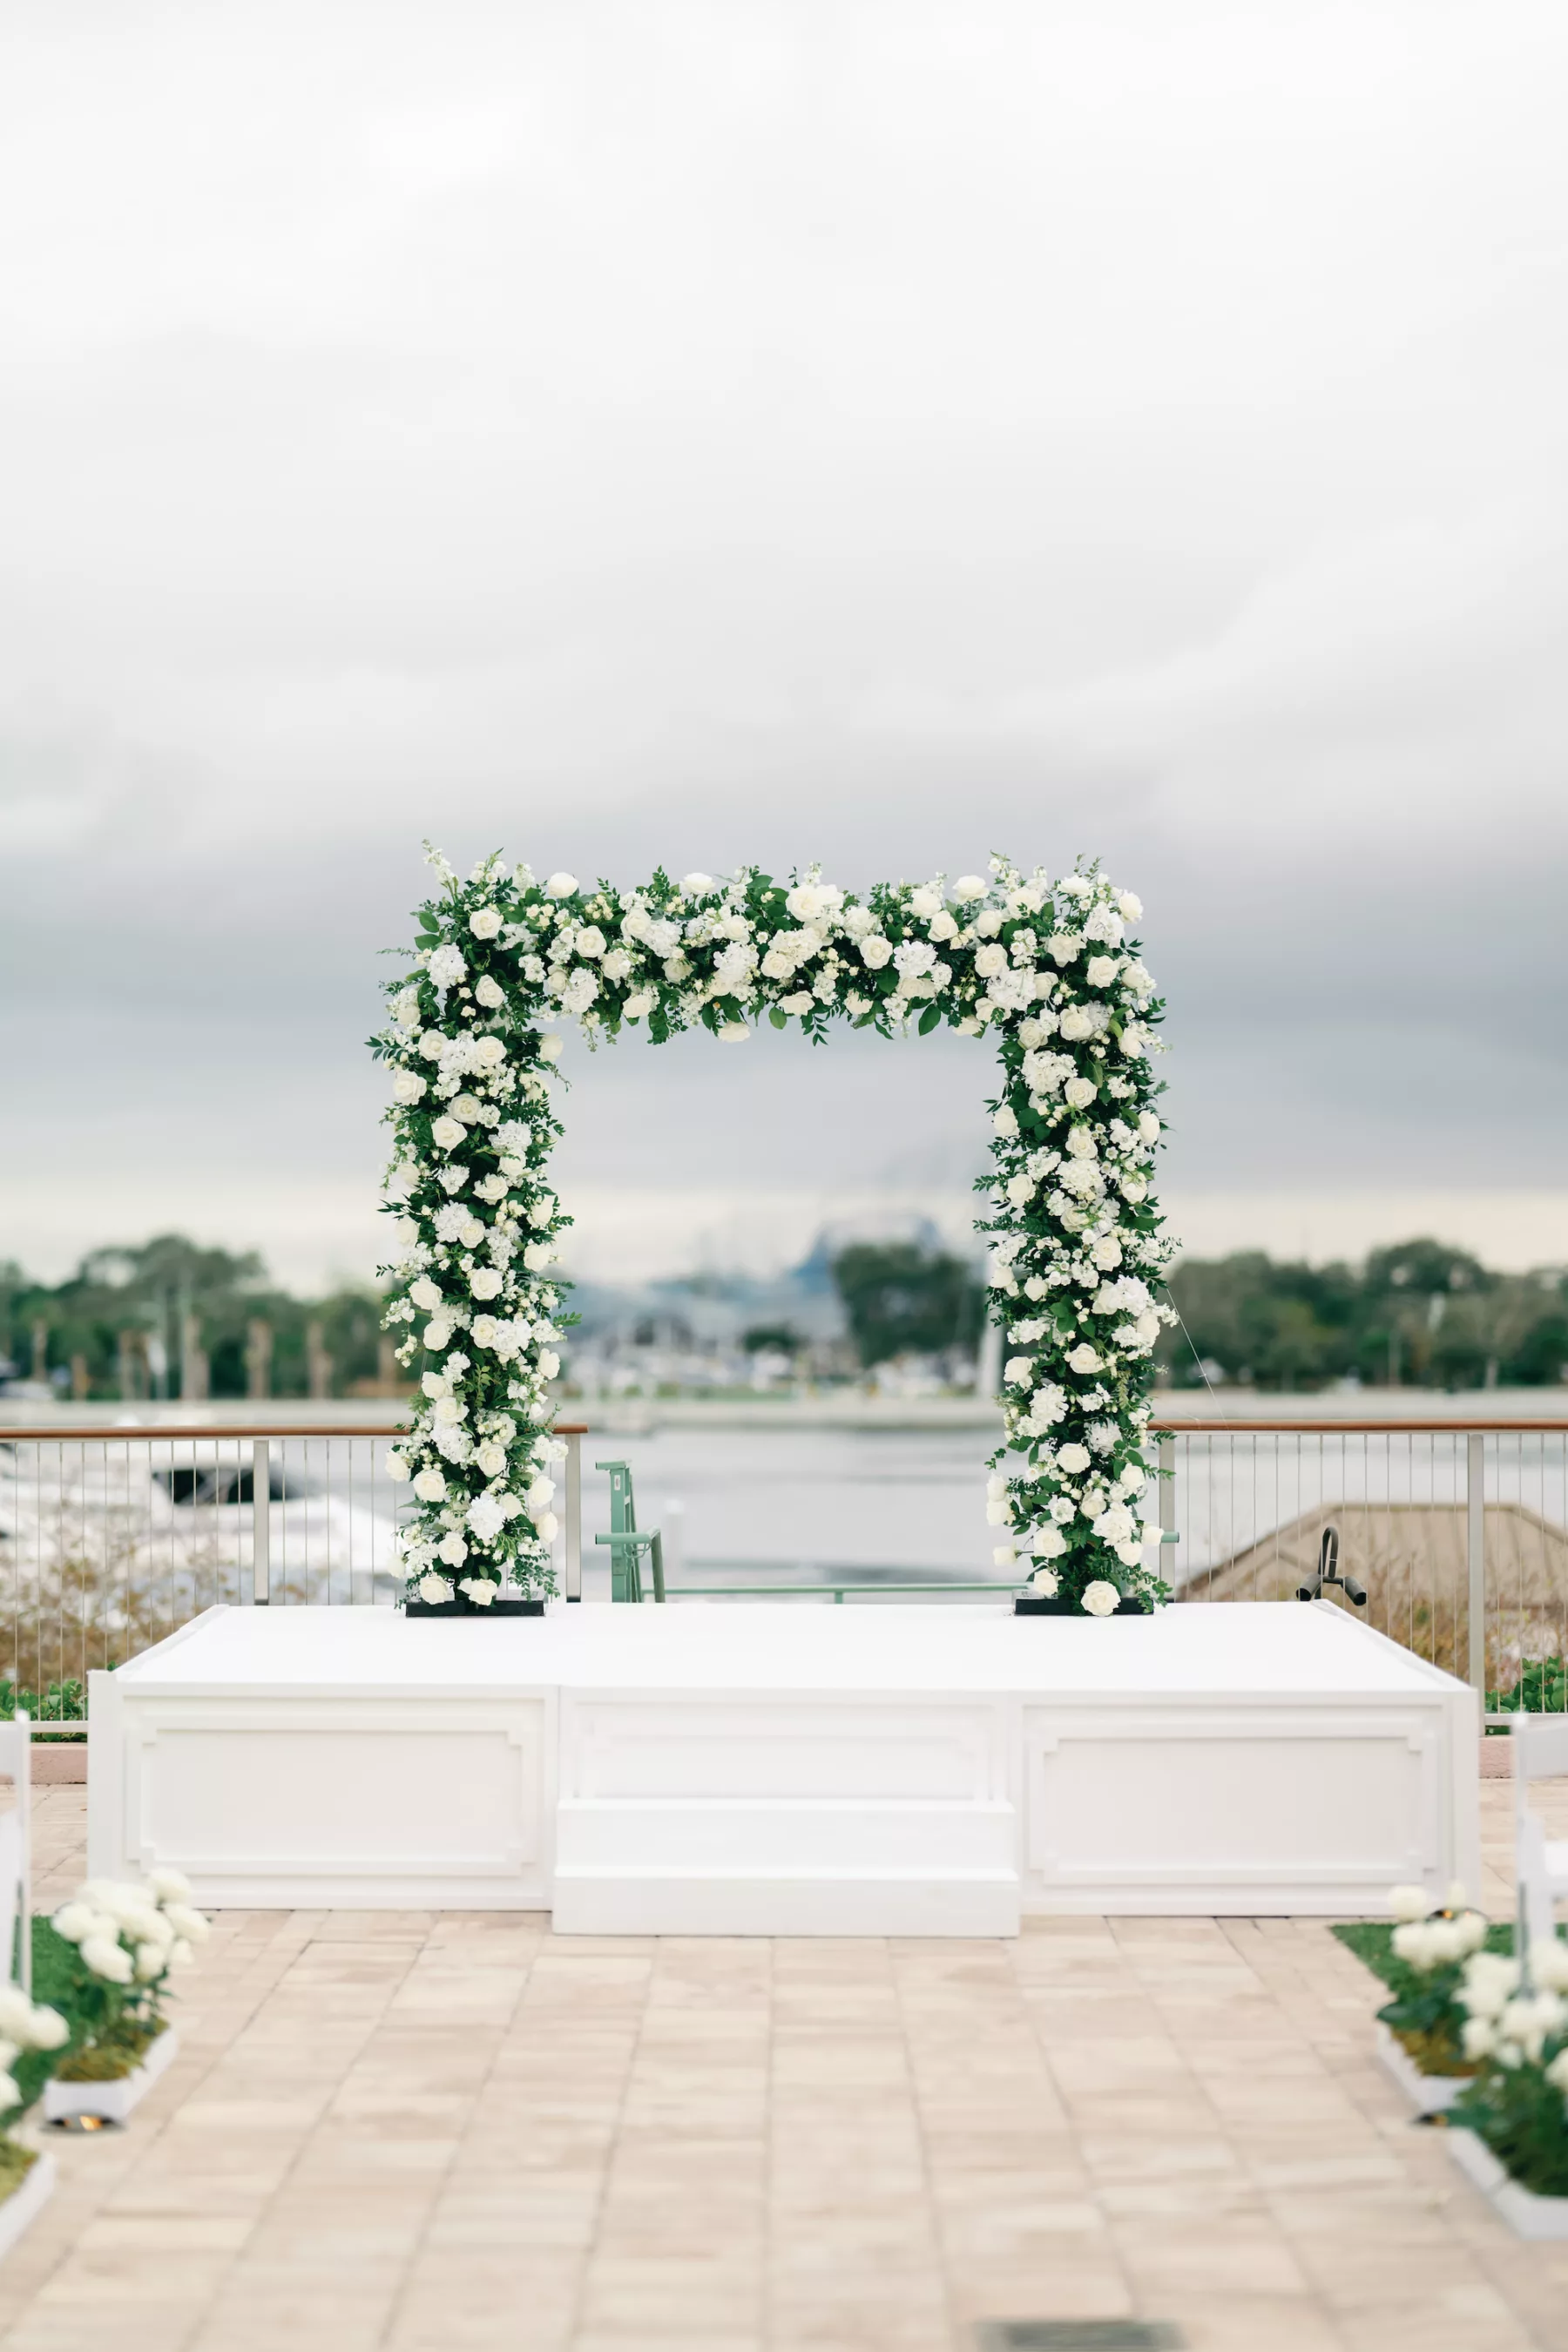 Timeless Outdoor Waterfront Winter Wedding Ceremony with White Rose and Greenery Arch and Stage Inspiration | St Pete Historic Hotel Venue The Vinoy